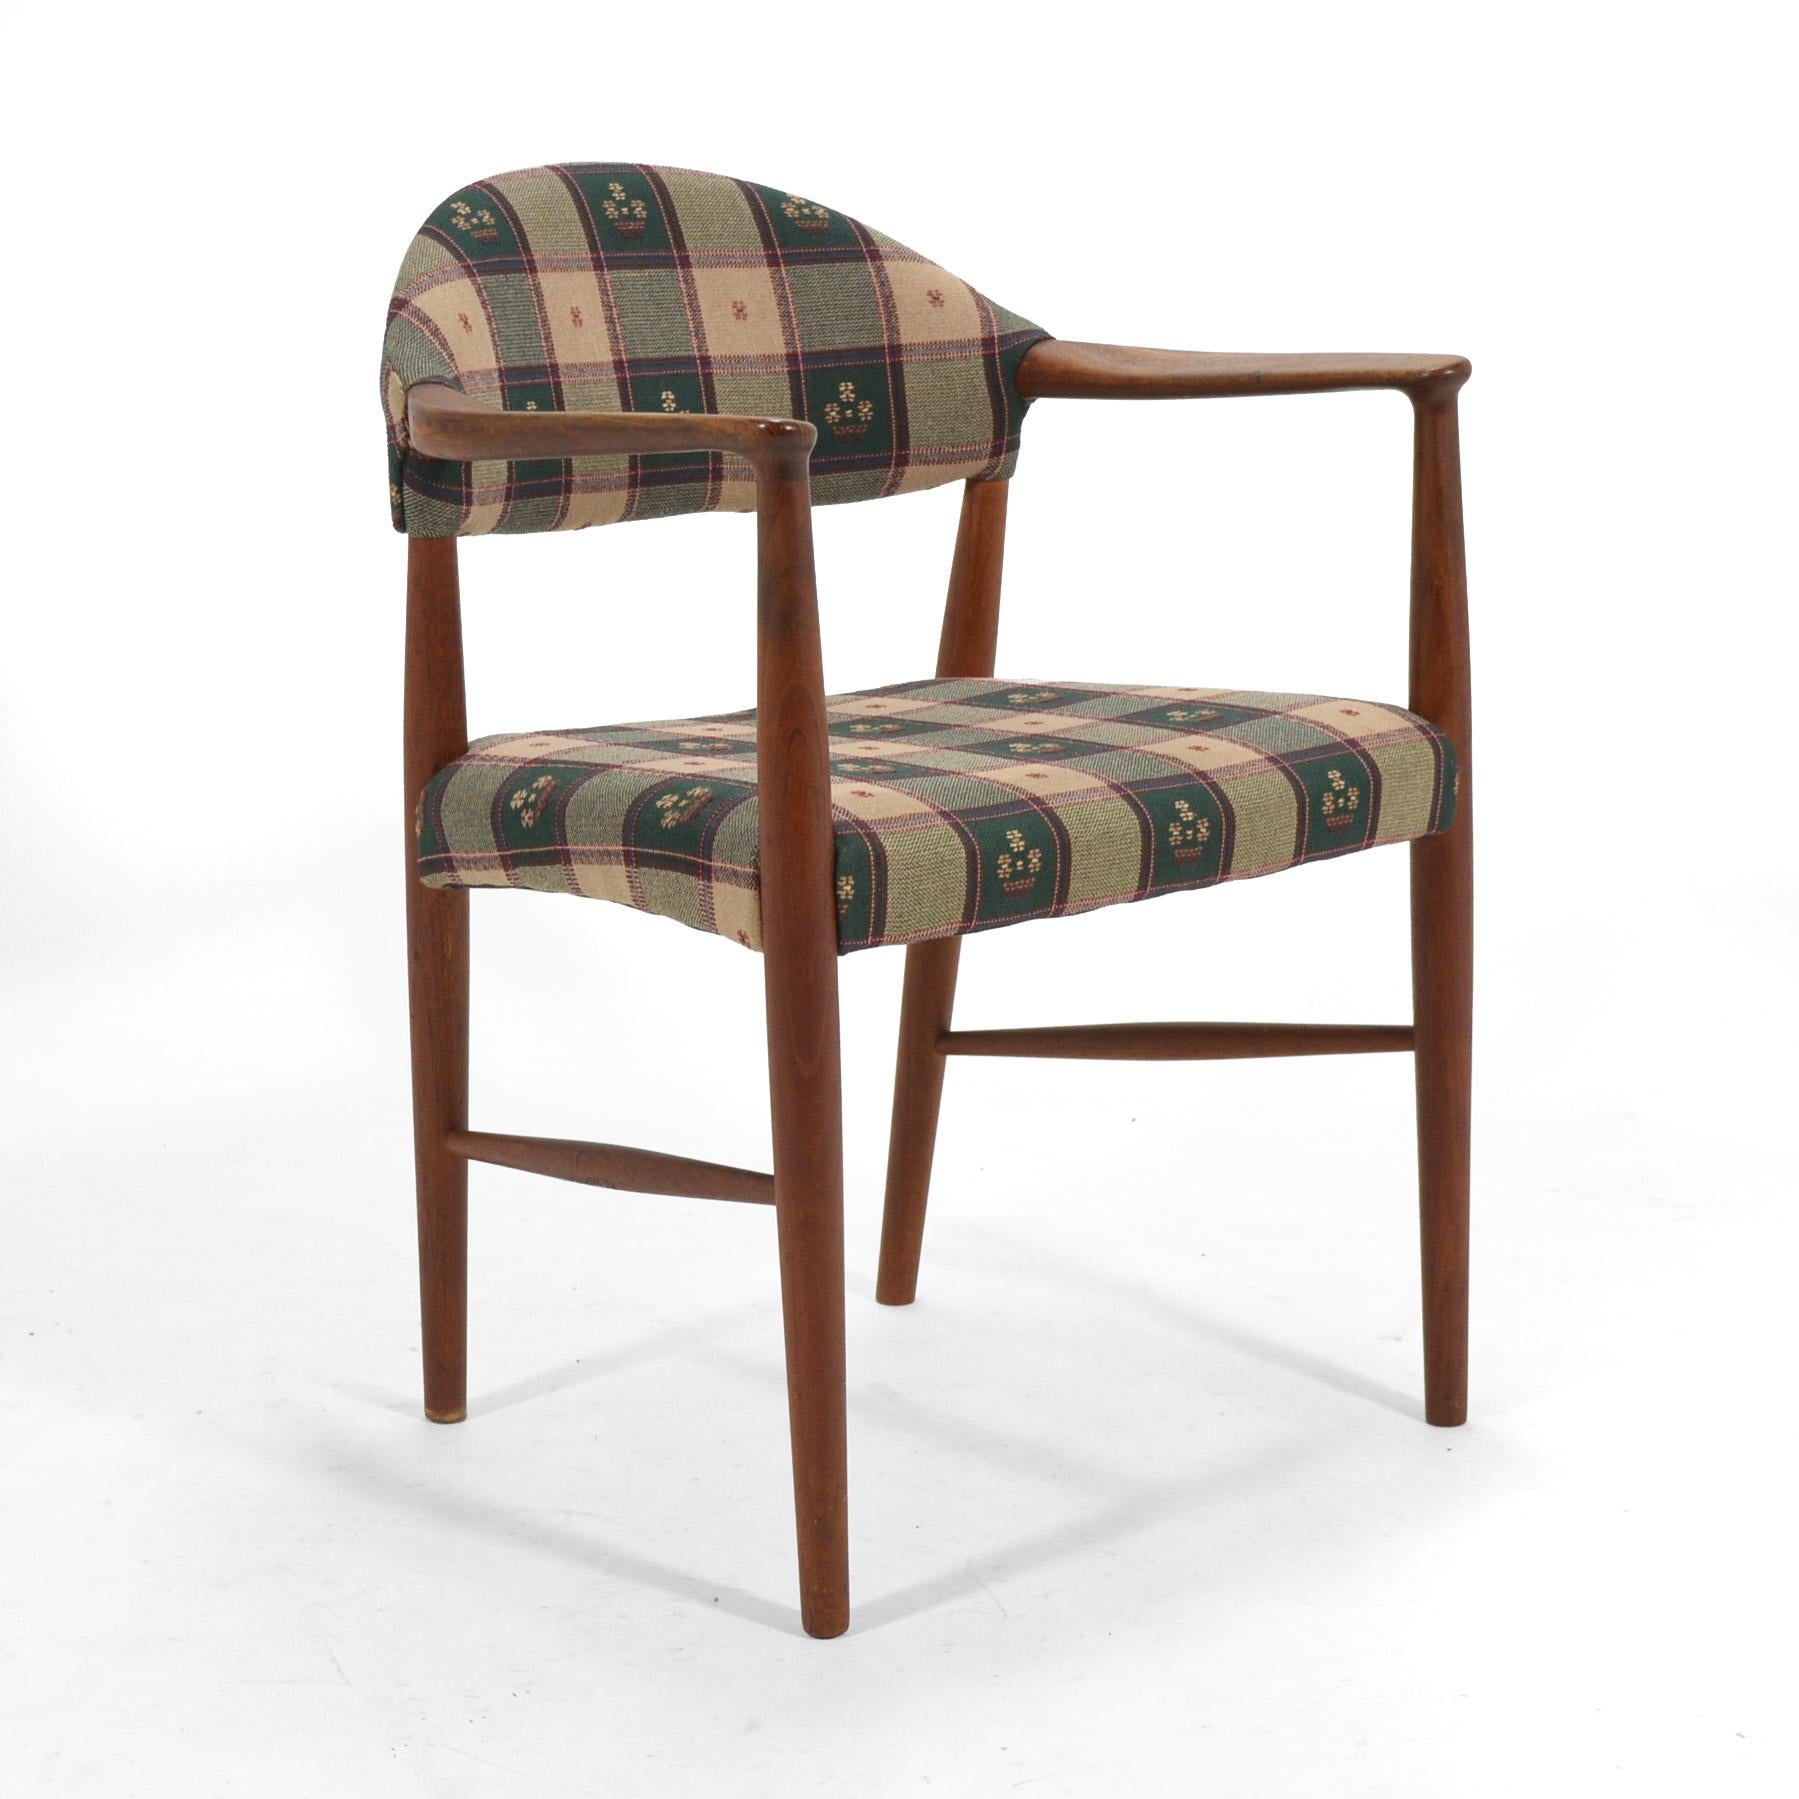 Designed by Kurt Olsen for Slagelse Møbelværk in 1955, this model 223 armchair is an understated, timeless design. Crafted of teak, it retains its original hand-loomed fabric upholstery, but would also look spectacular redone in the fabric or